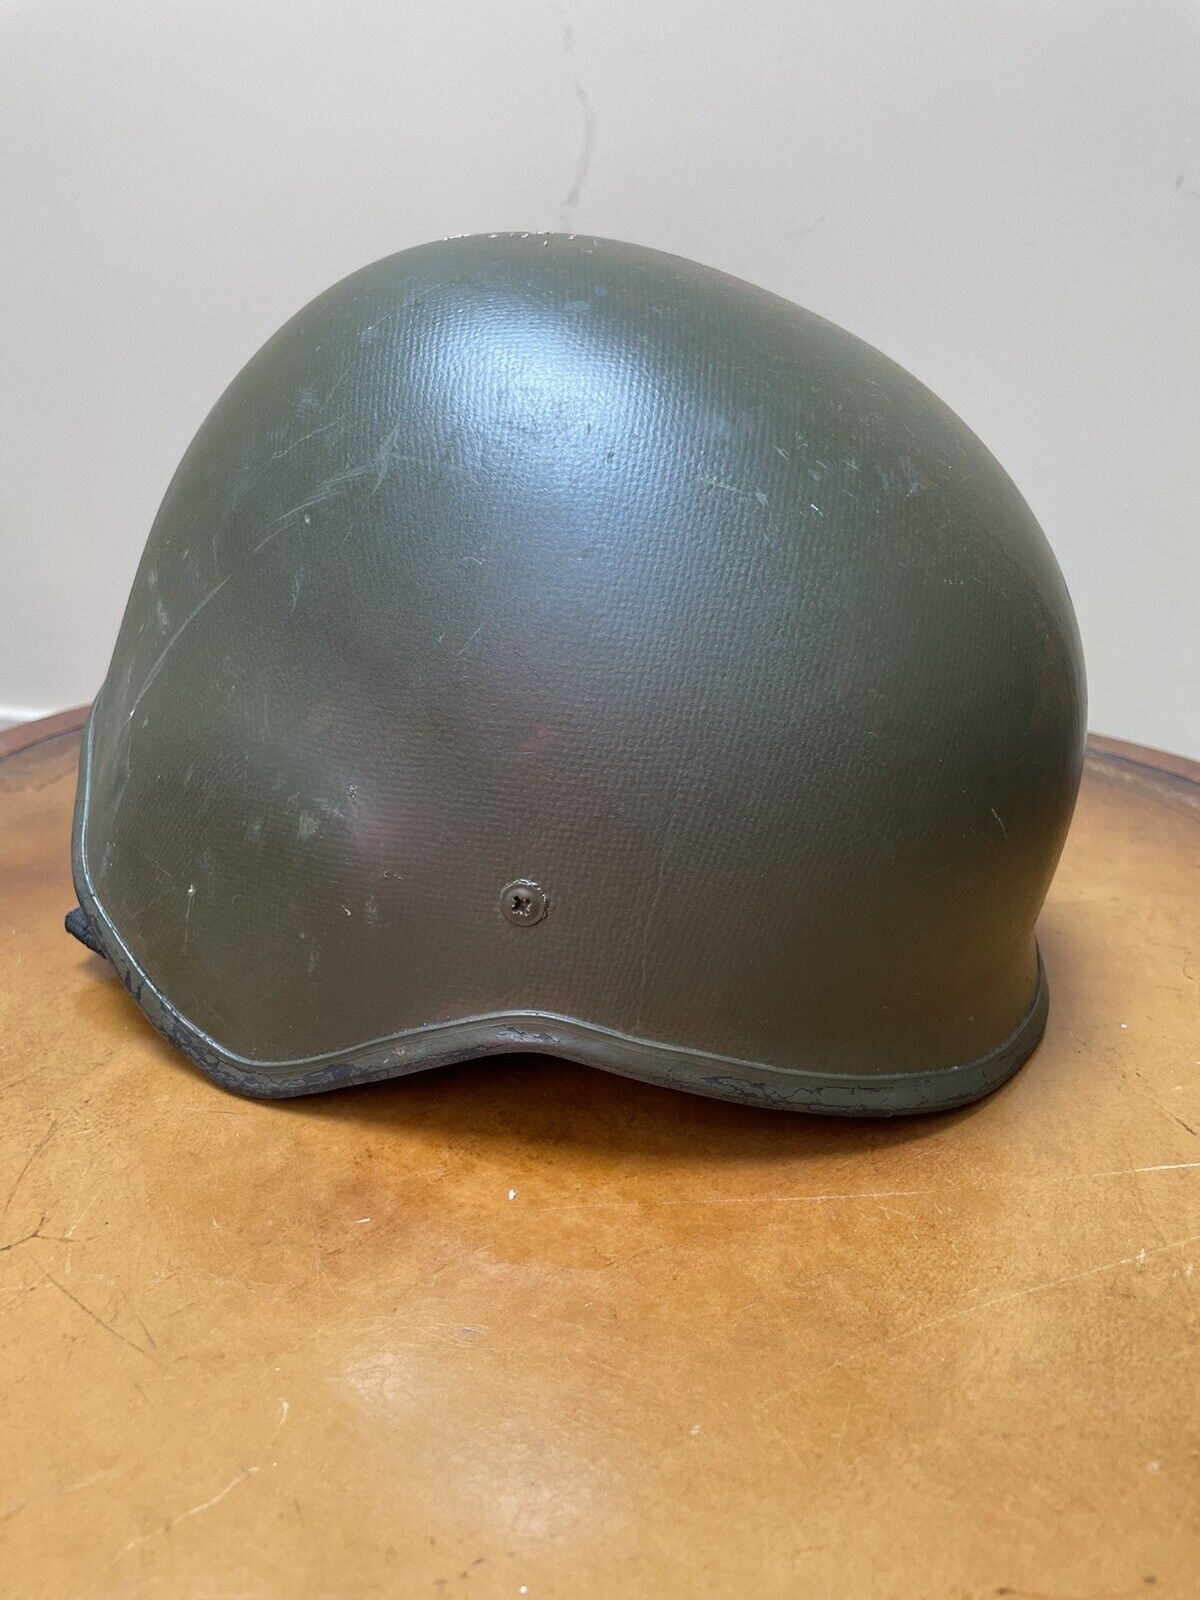 Early 2000s ACH Advanced Combat Helmet Size Large